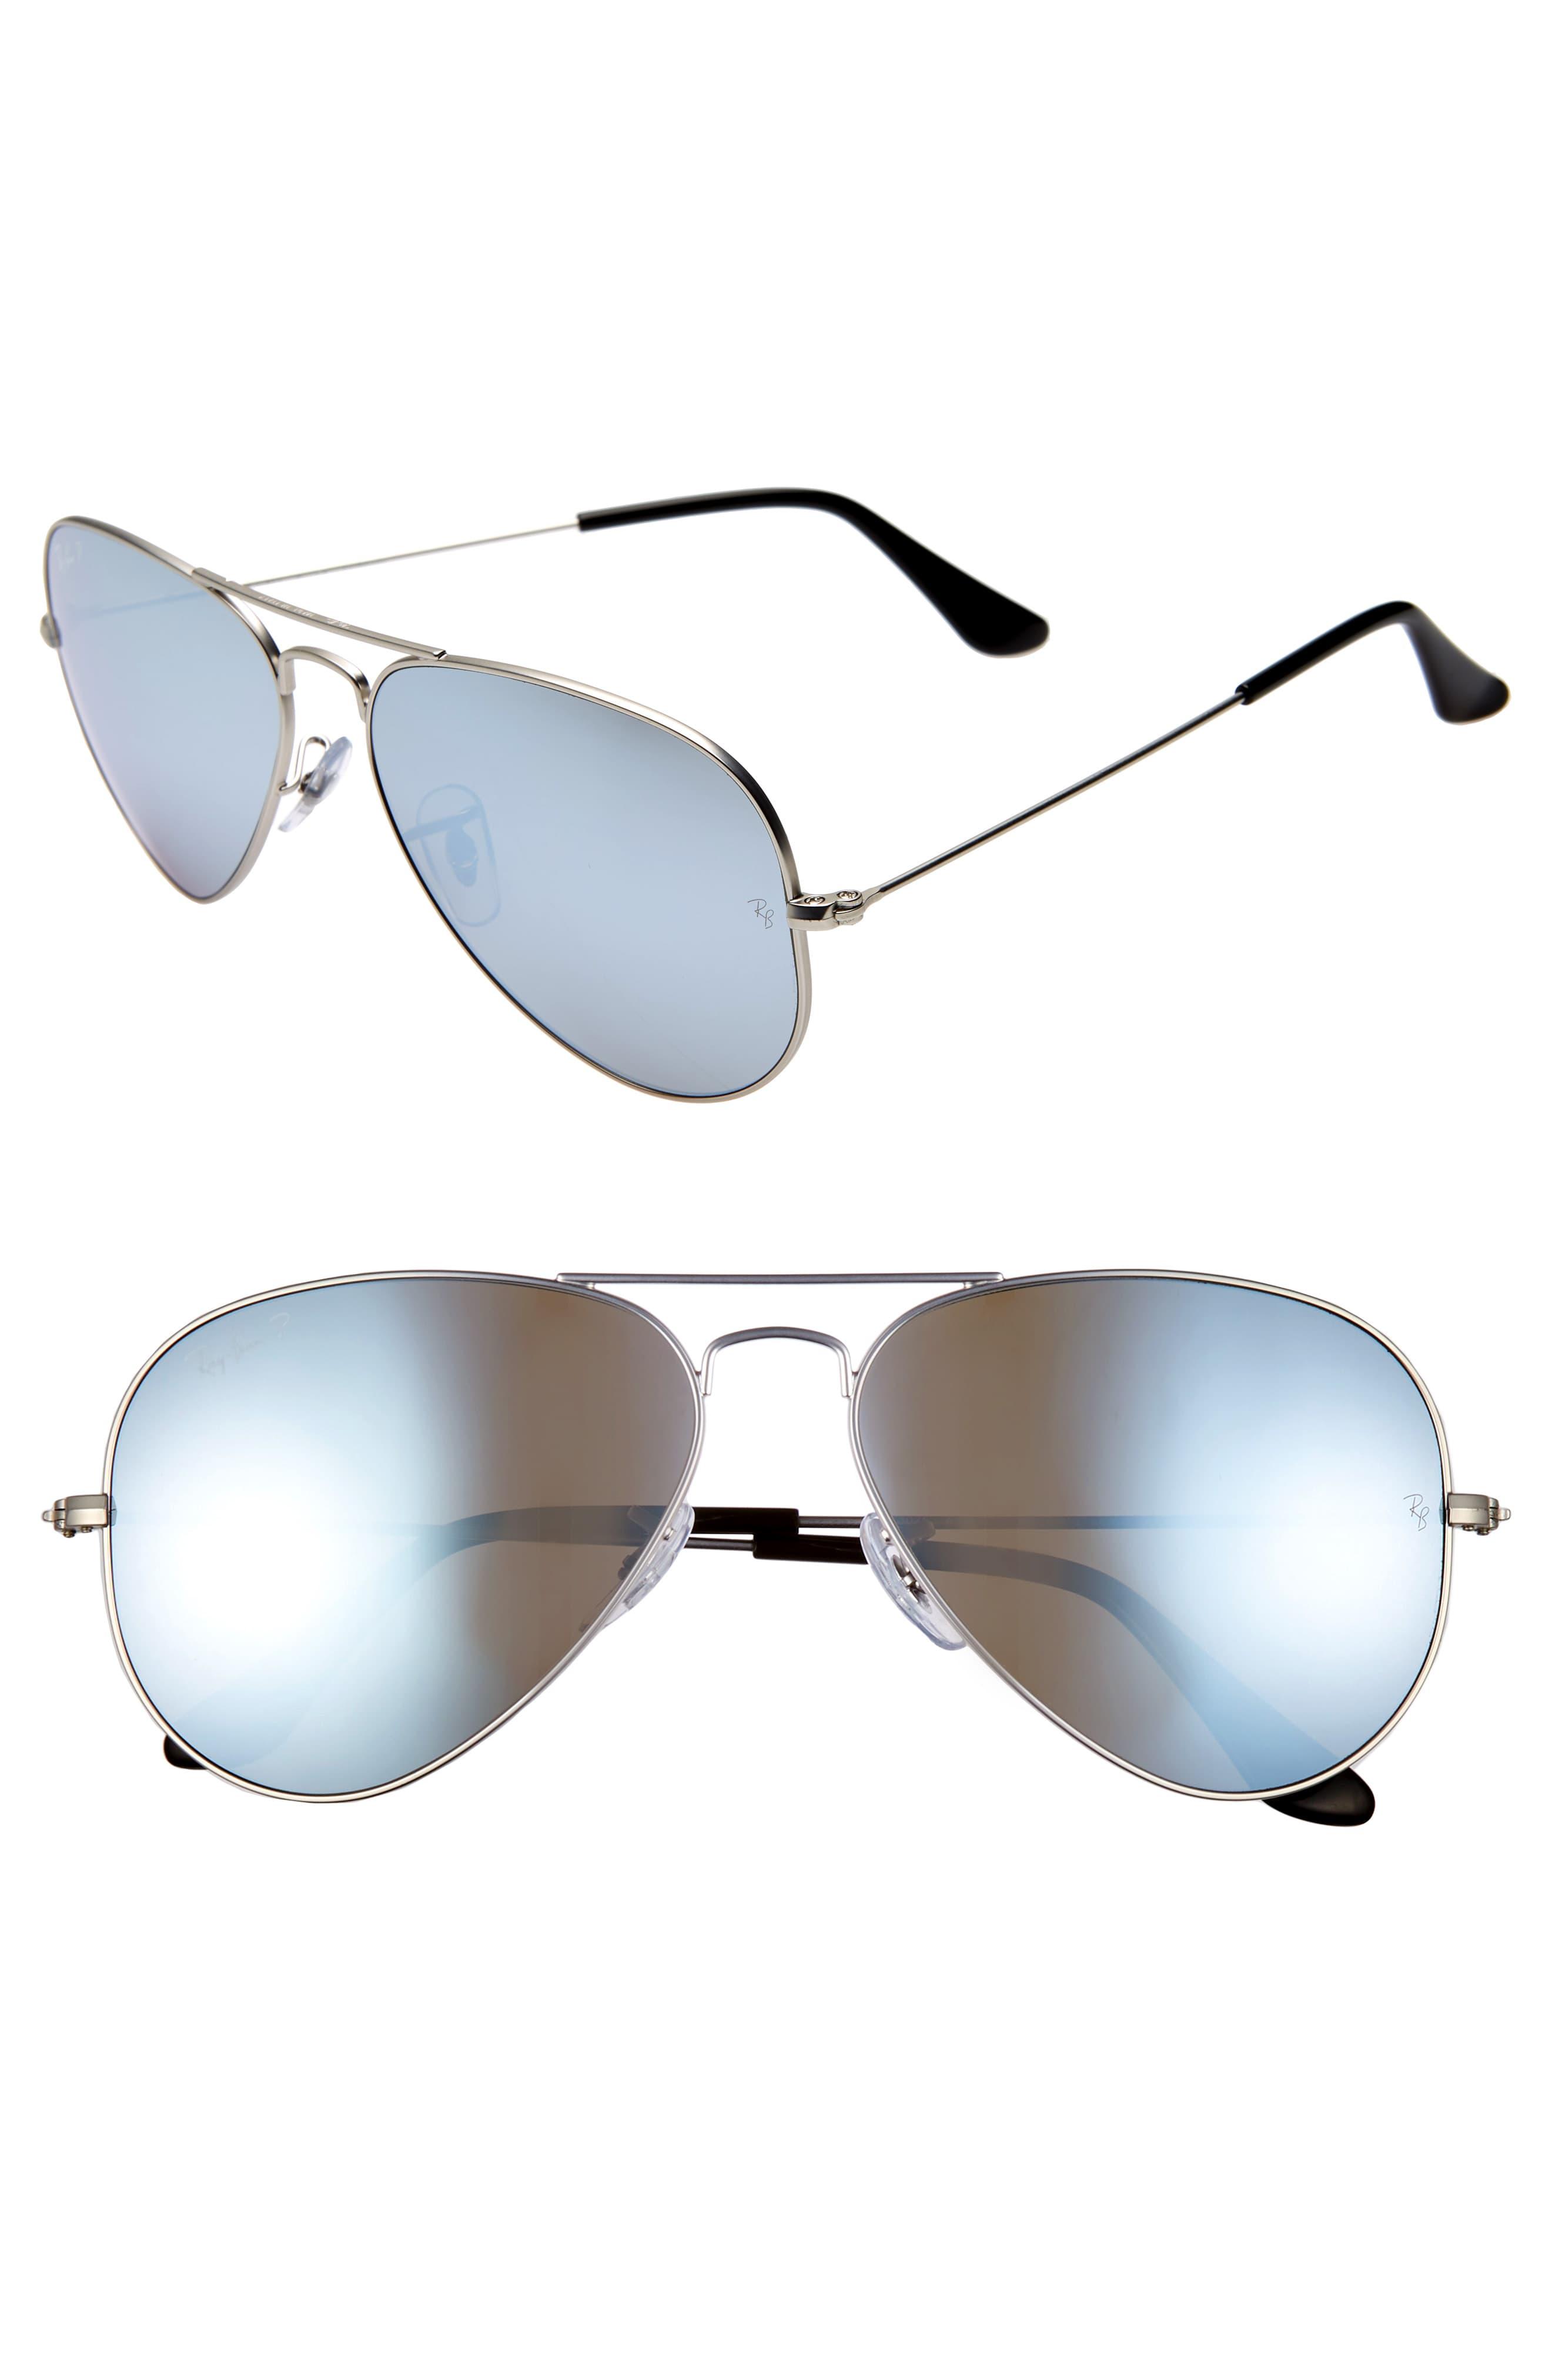 Ray-Ban Standard Icons 58mm Mirrored Polarized Aviator Sunglasses in